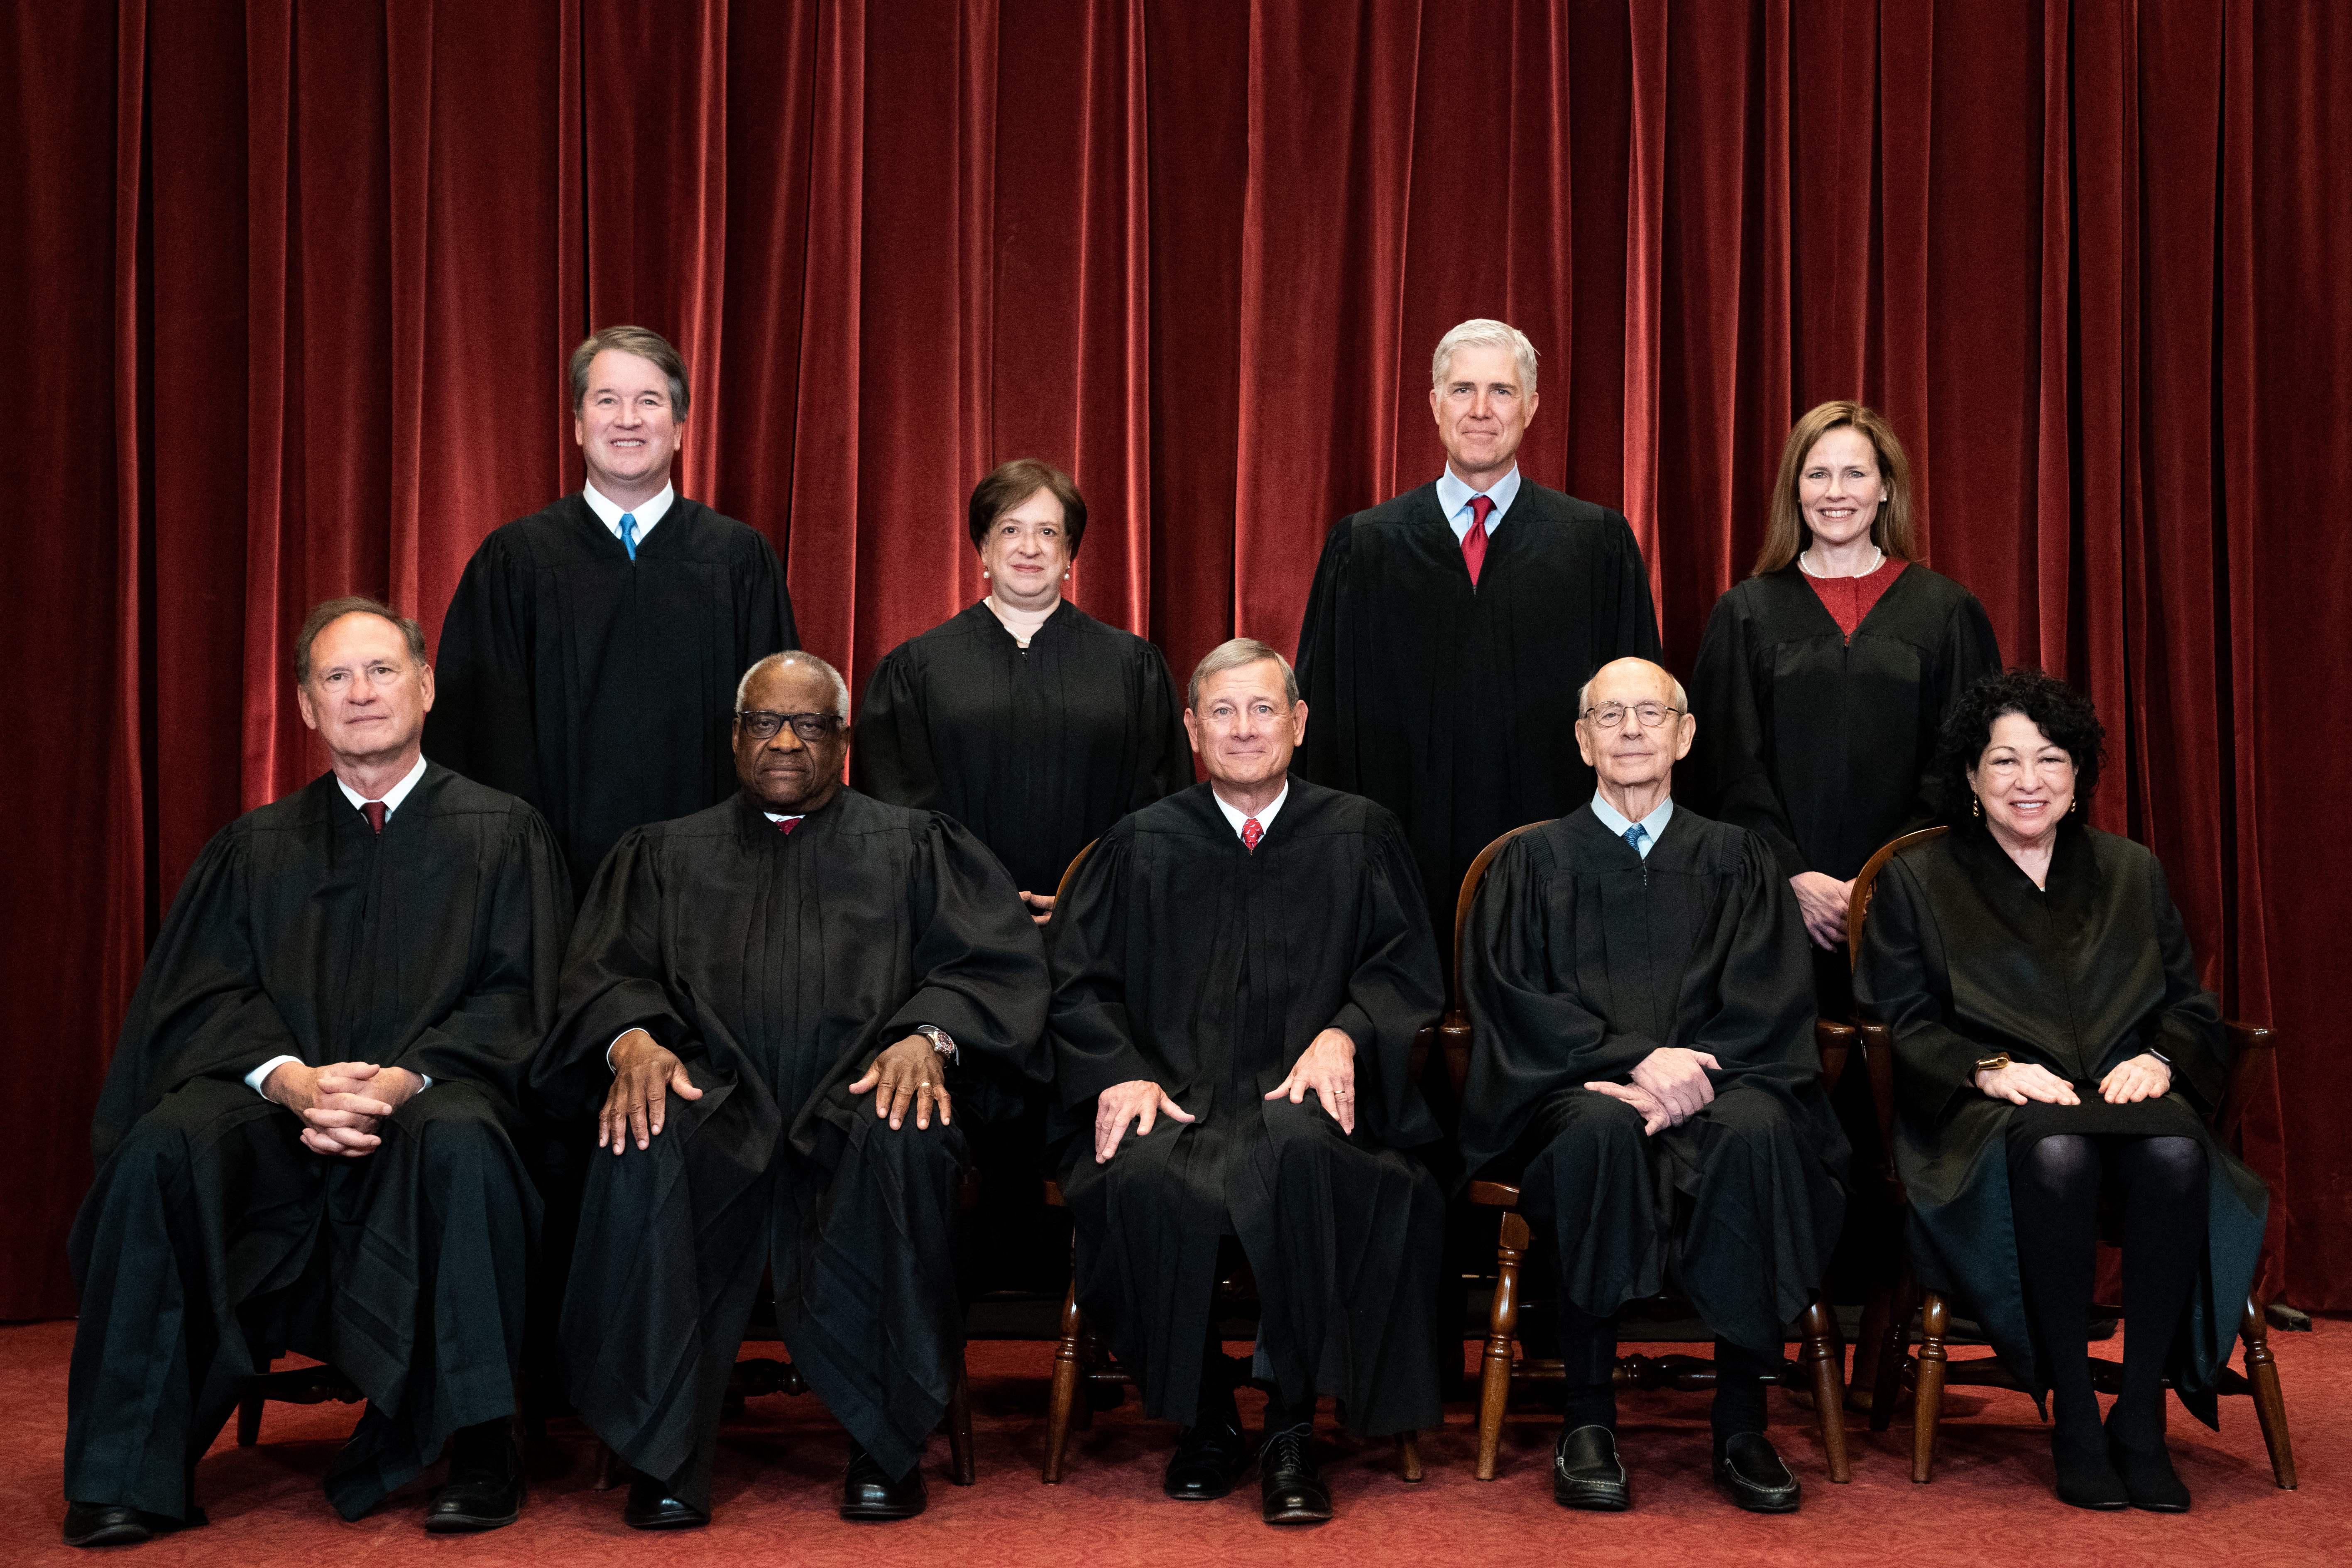 The Supreme Court's latest group photo.